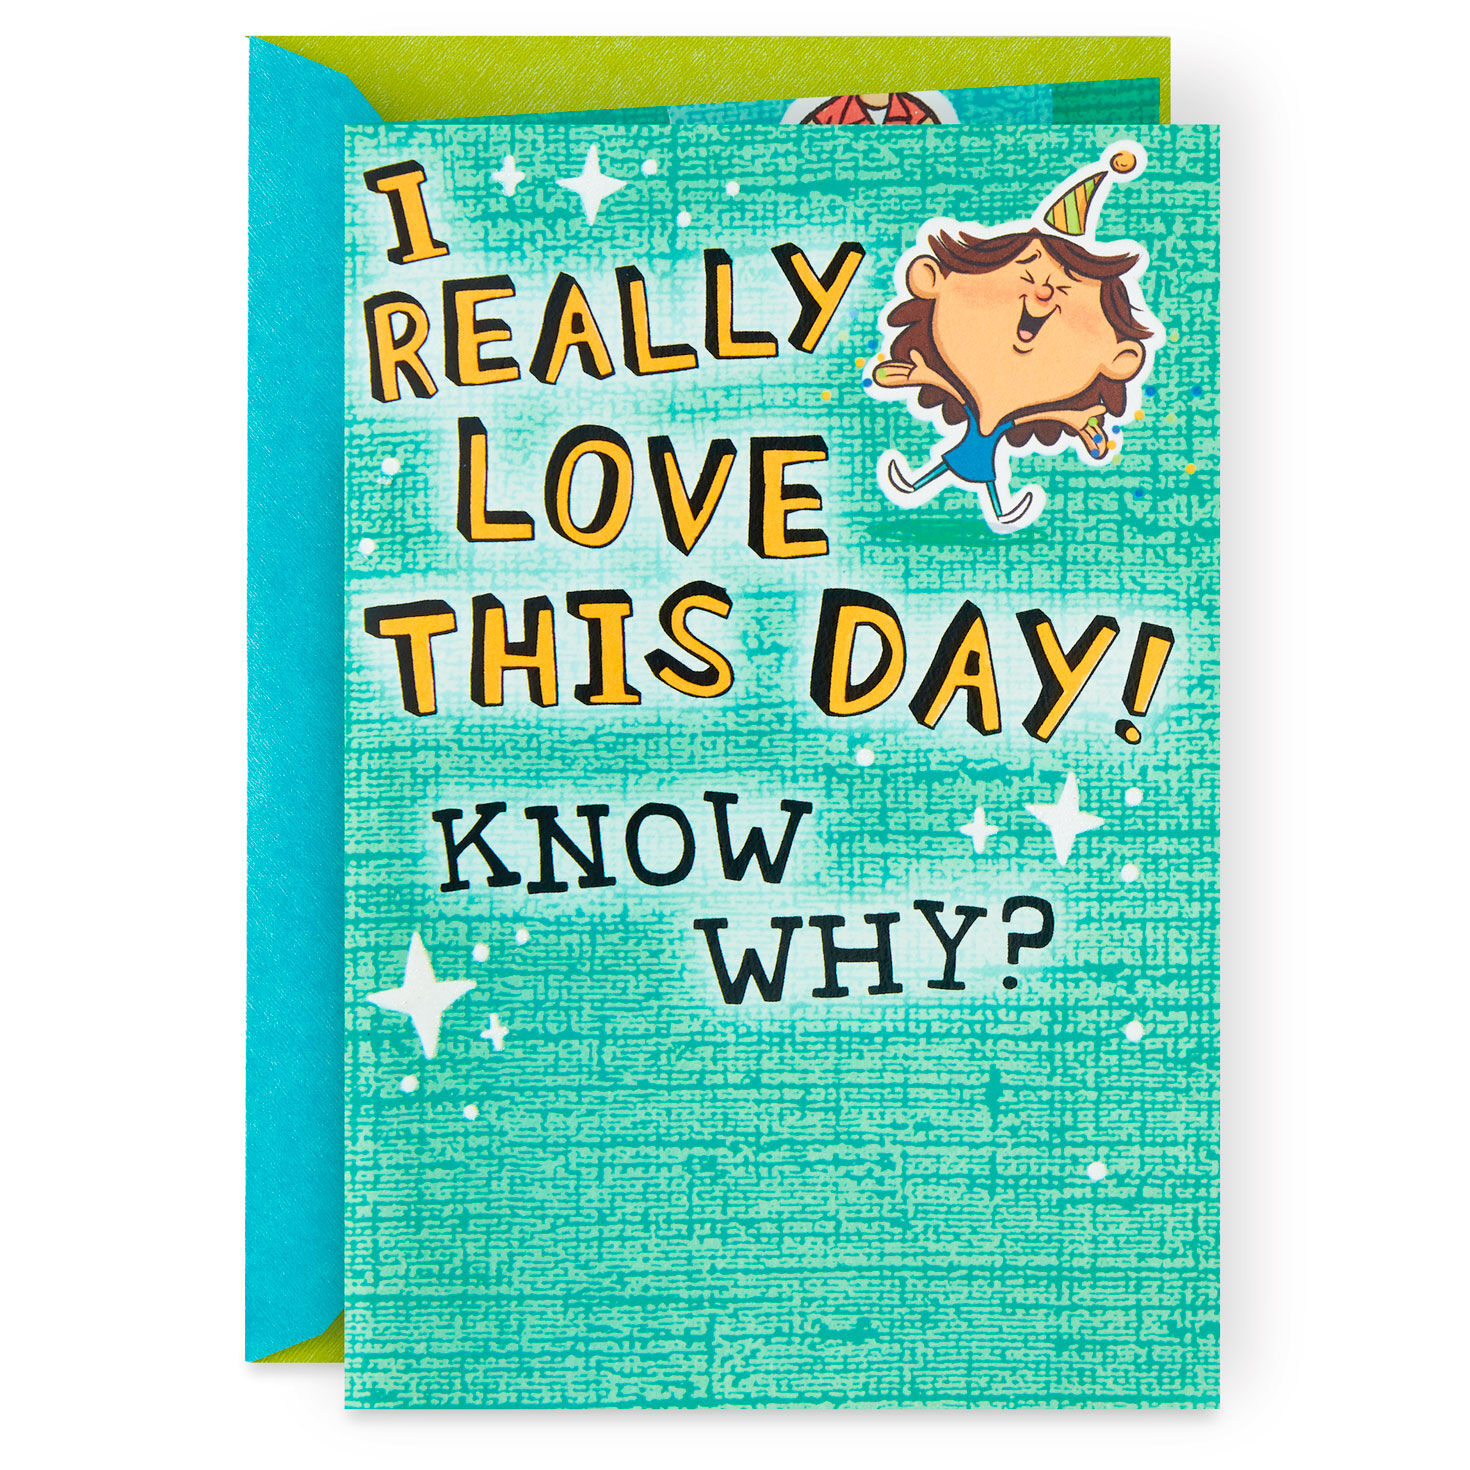 Love This Day and You Funny Pop-Up Birthday Card for Him for only USD 5.59 | Hallmark